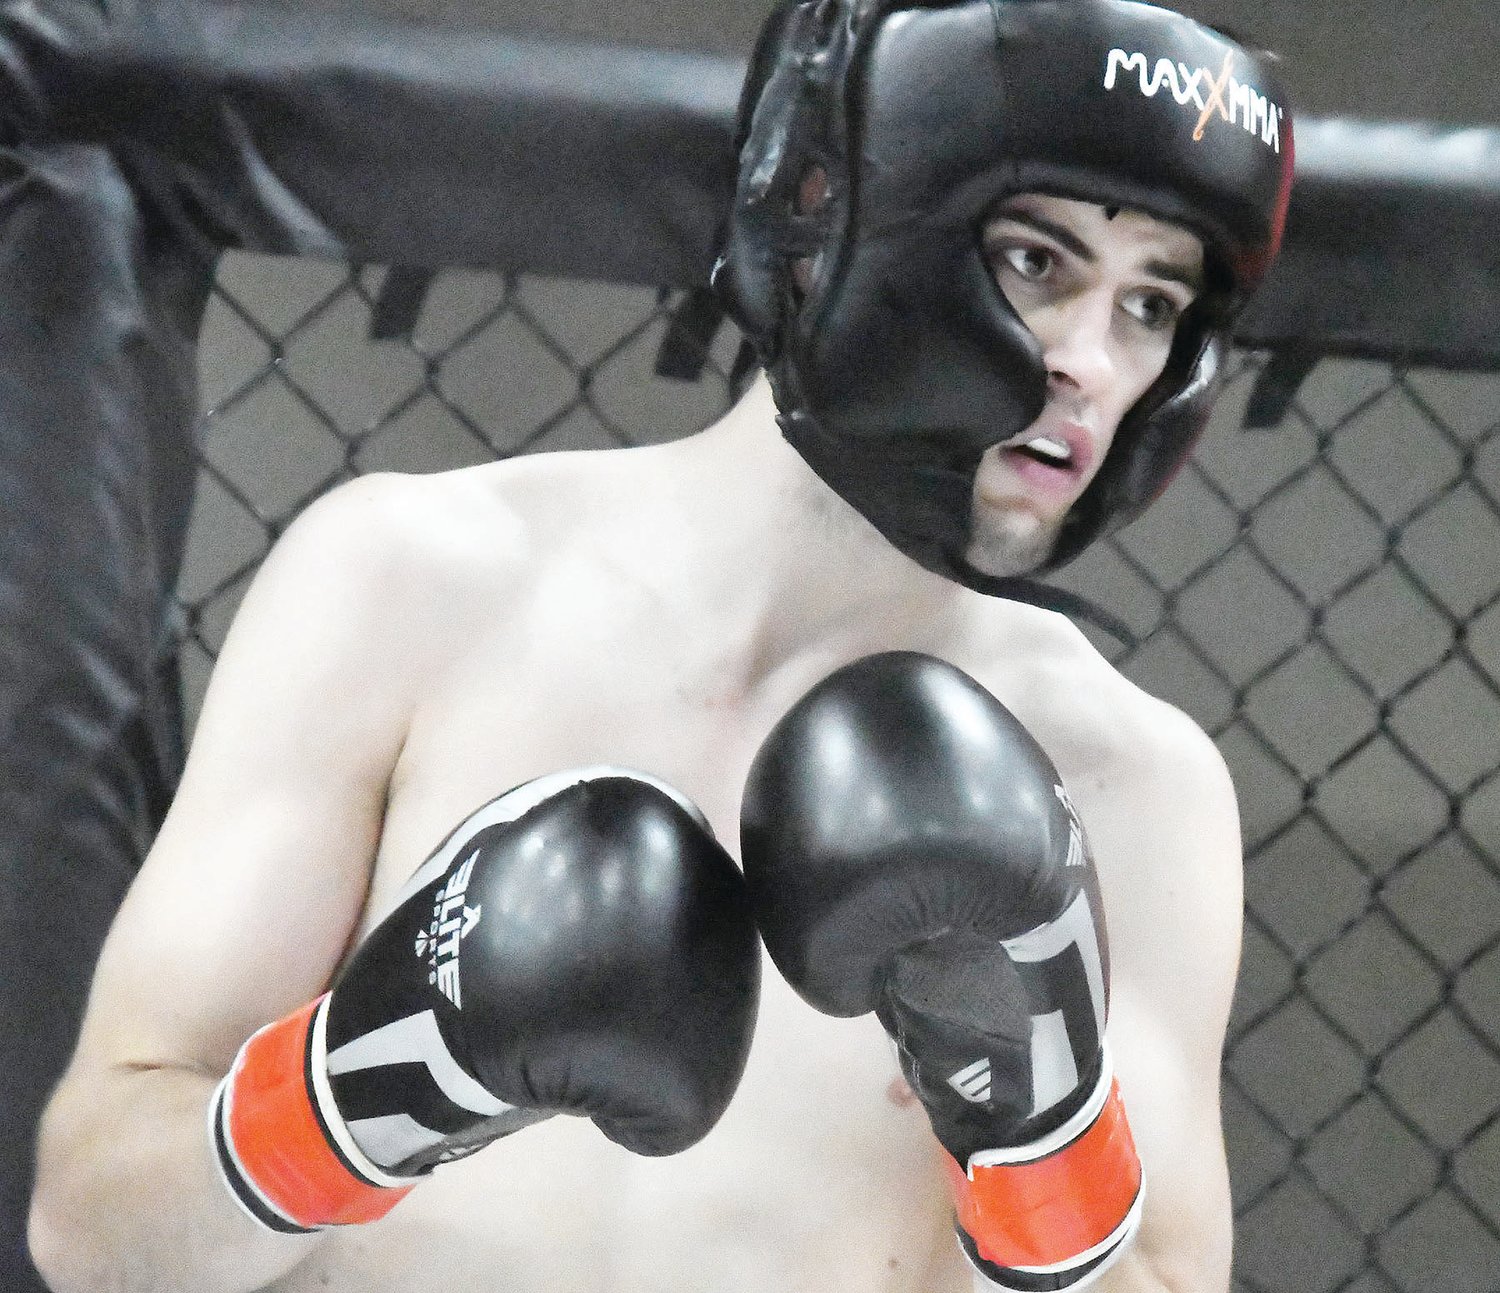 Colten Rodgers of Dexter competes during a kickboxing match on Saturday, Sept. 24, at Moberly Area Community College.